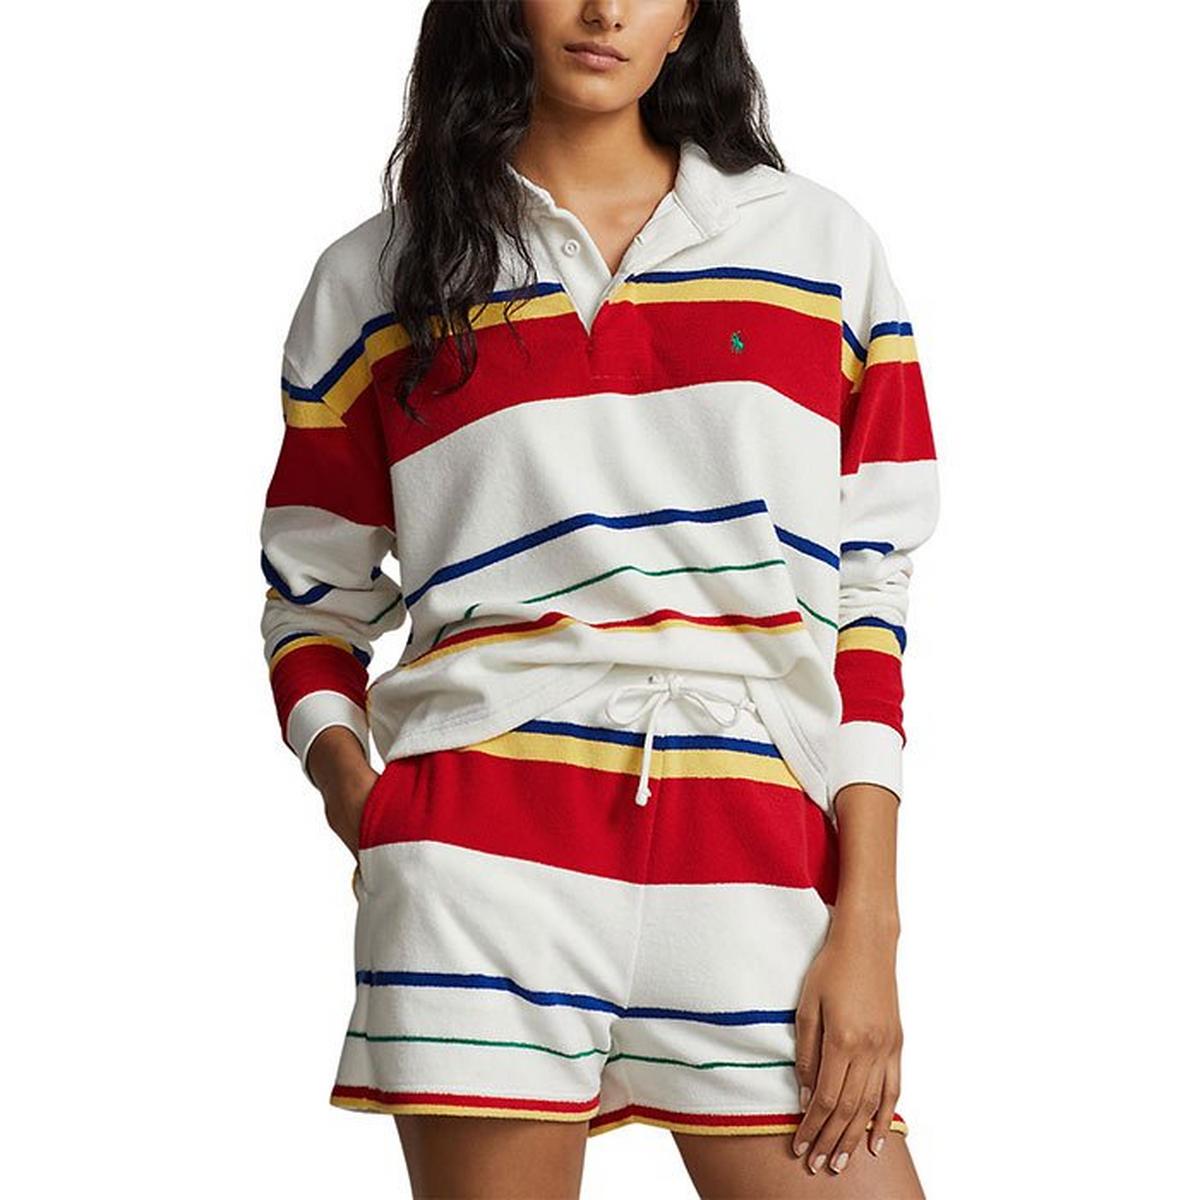 Women's Striped Terry Rugby Shirt